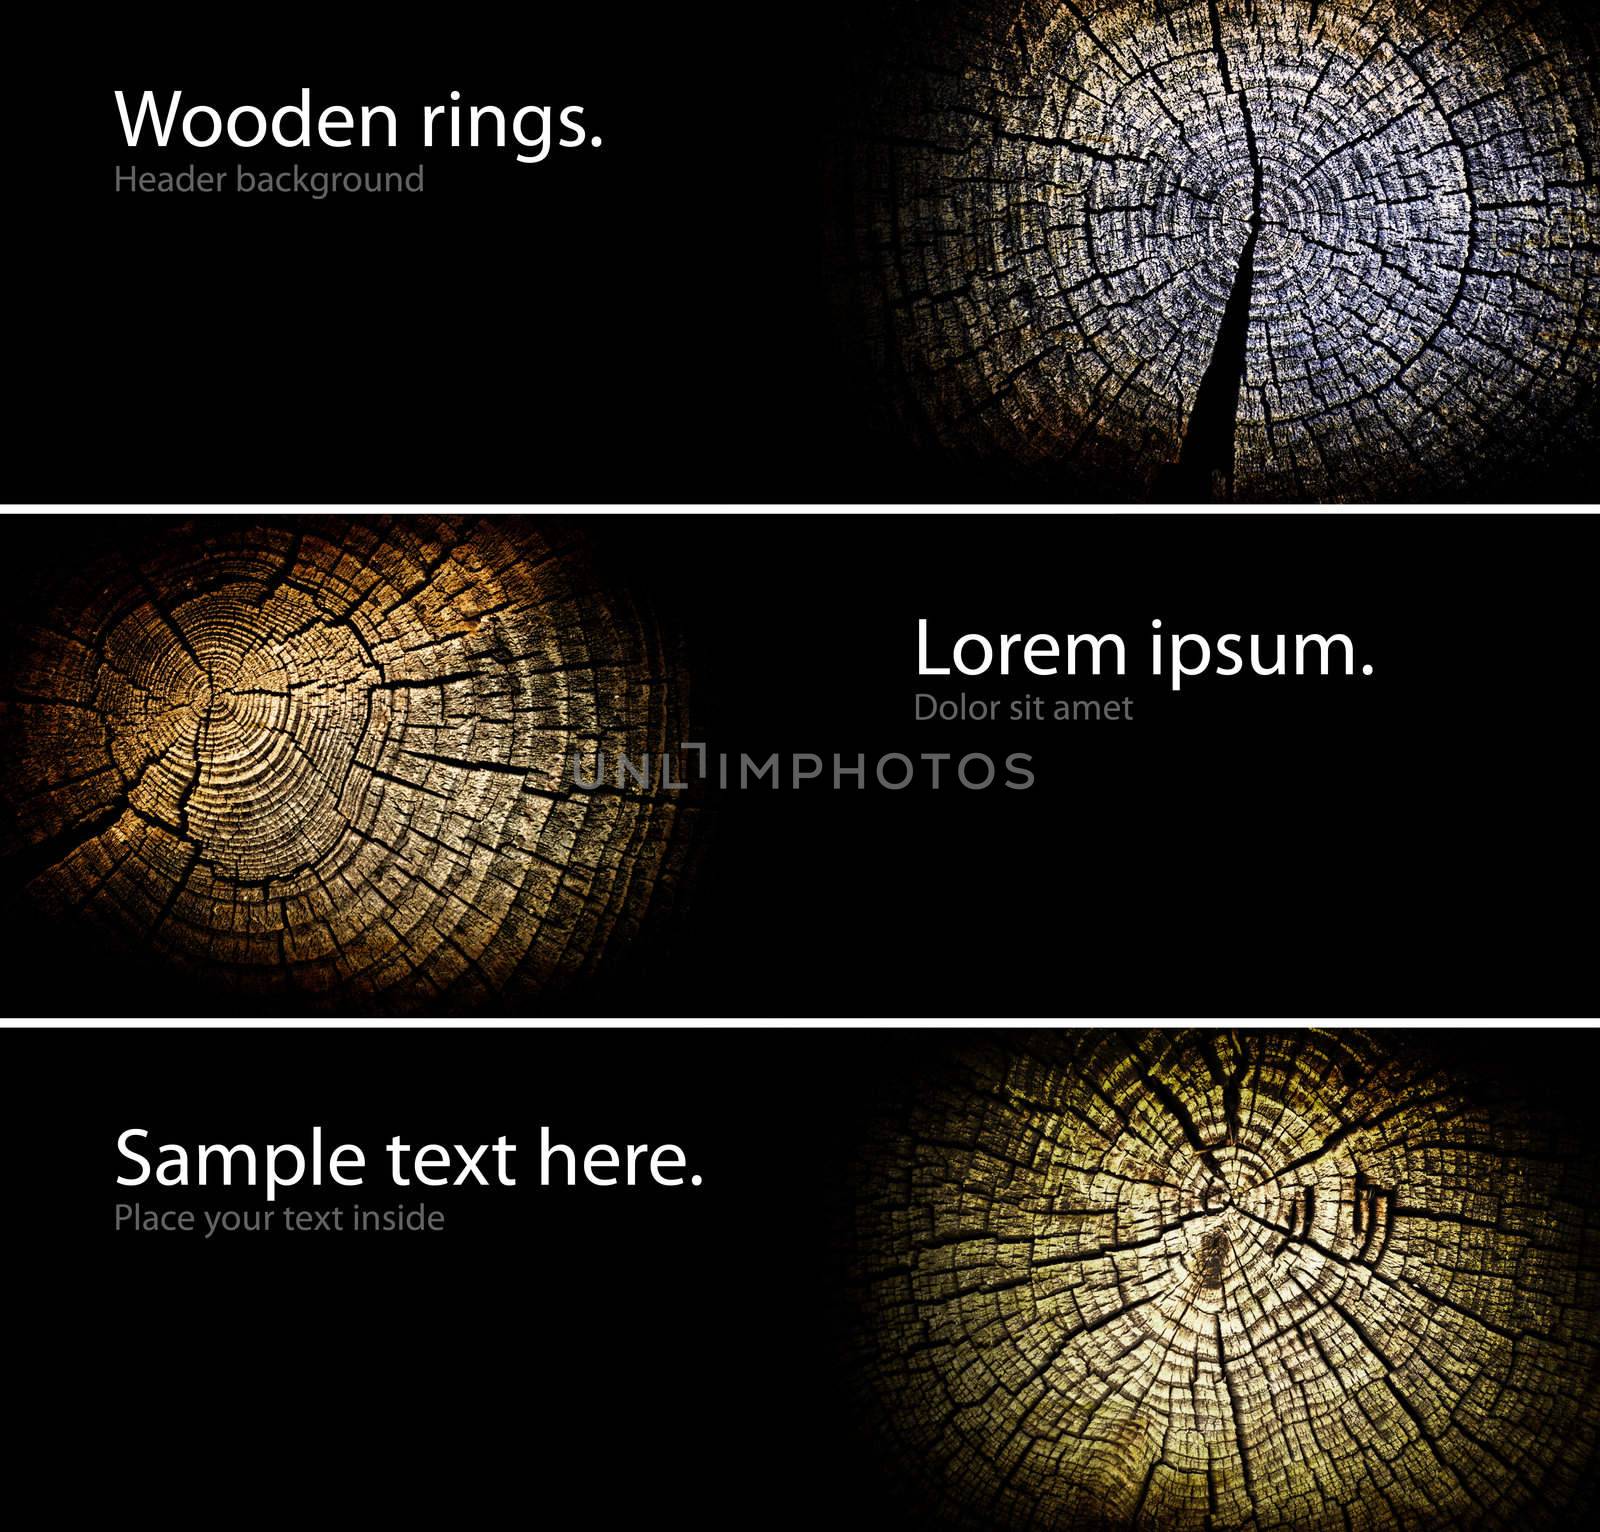 Wood rings. Internet headers set. Isolated on black with copy-space.